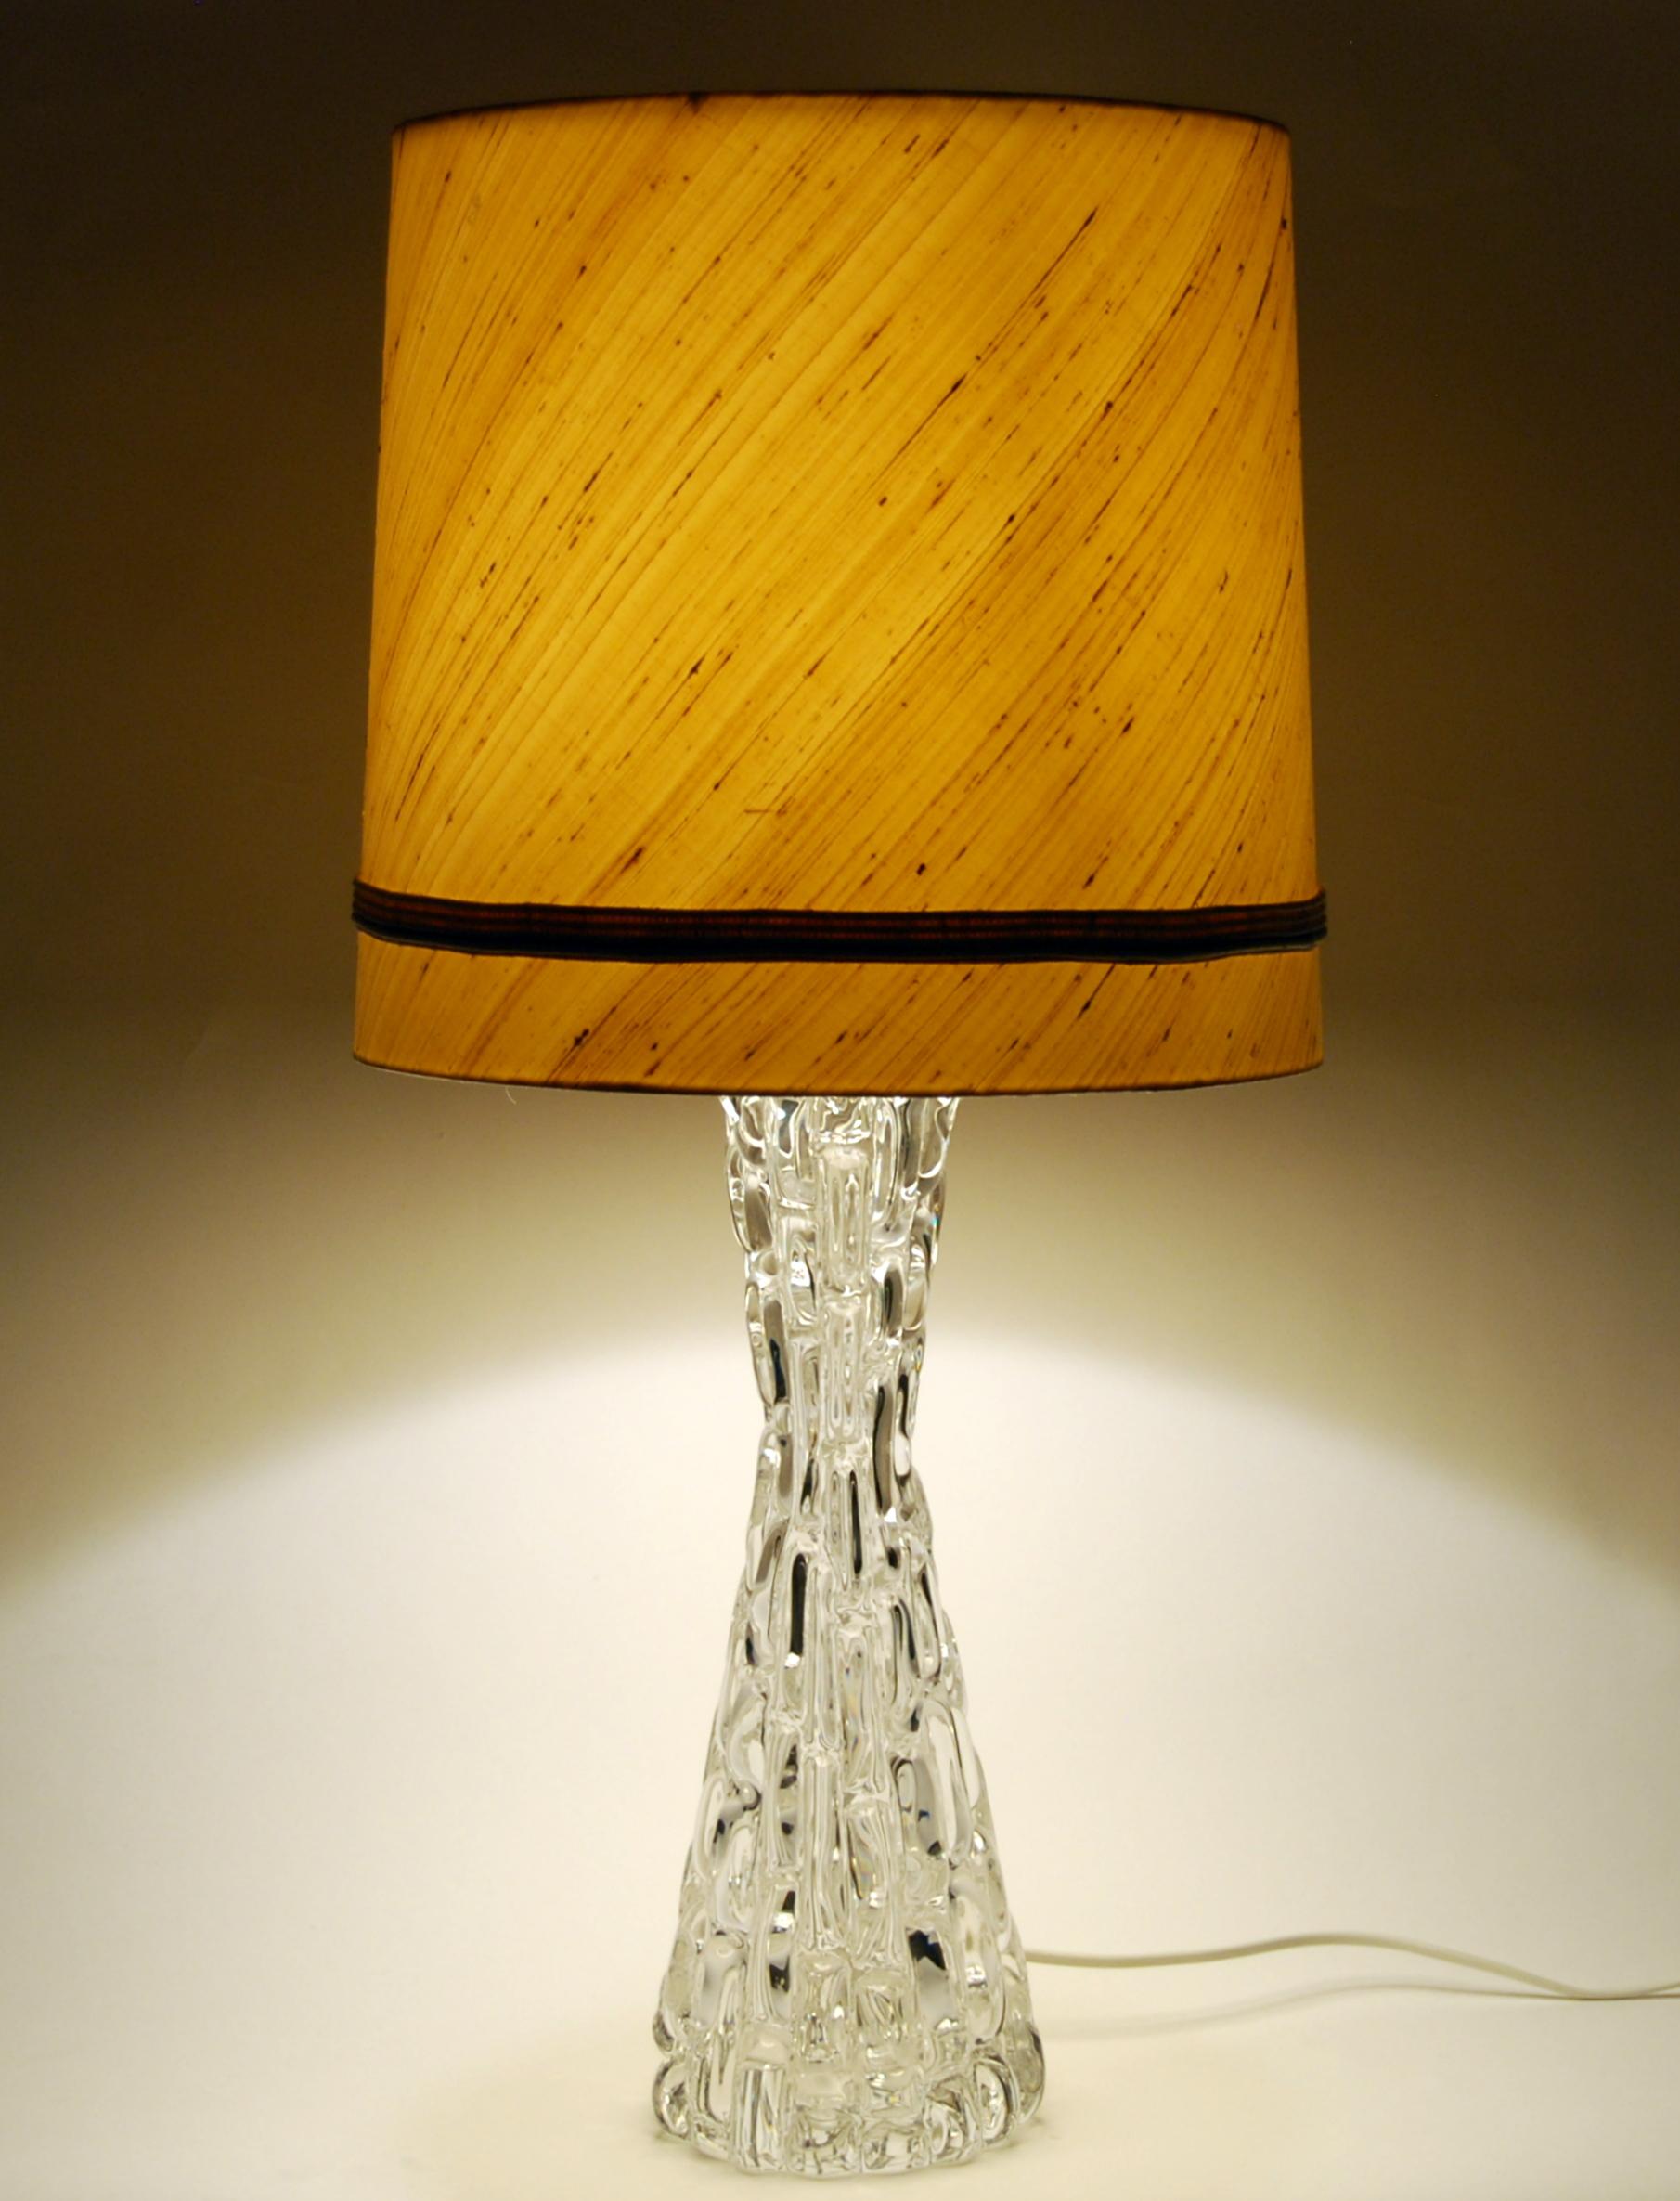 A large, heavy model RD 1477 table lamp in crystal glass by Carl Fagerlund for Orrefors, Sweden. The heavy hour glass form base is made of crystal glass. Polished nickel plated fittings. Comes with original shade in beige raw silk.

 